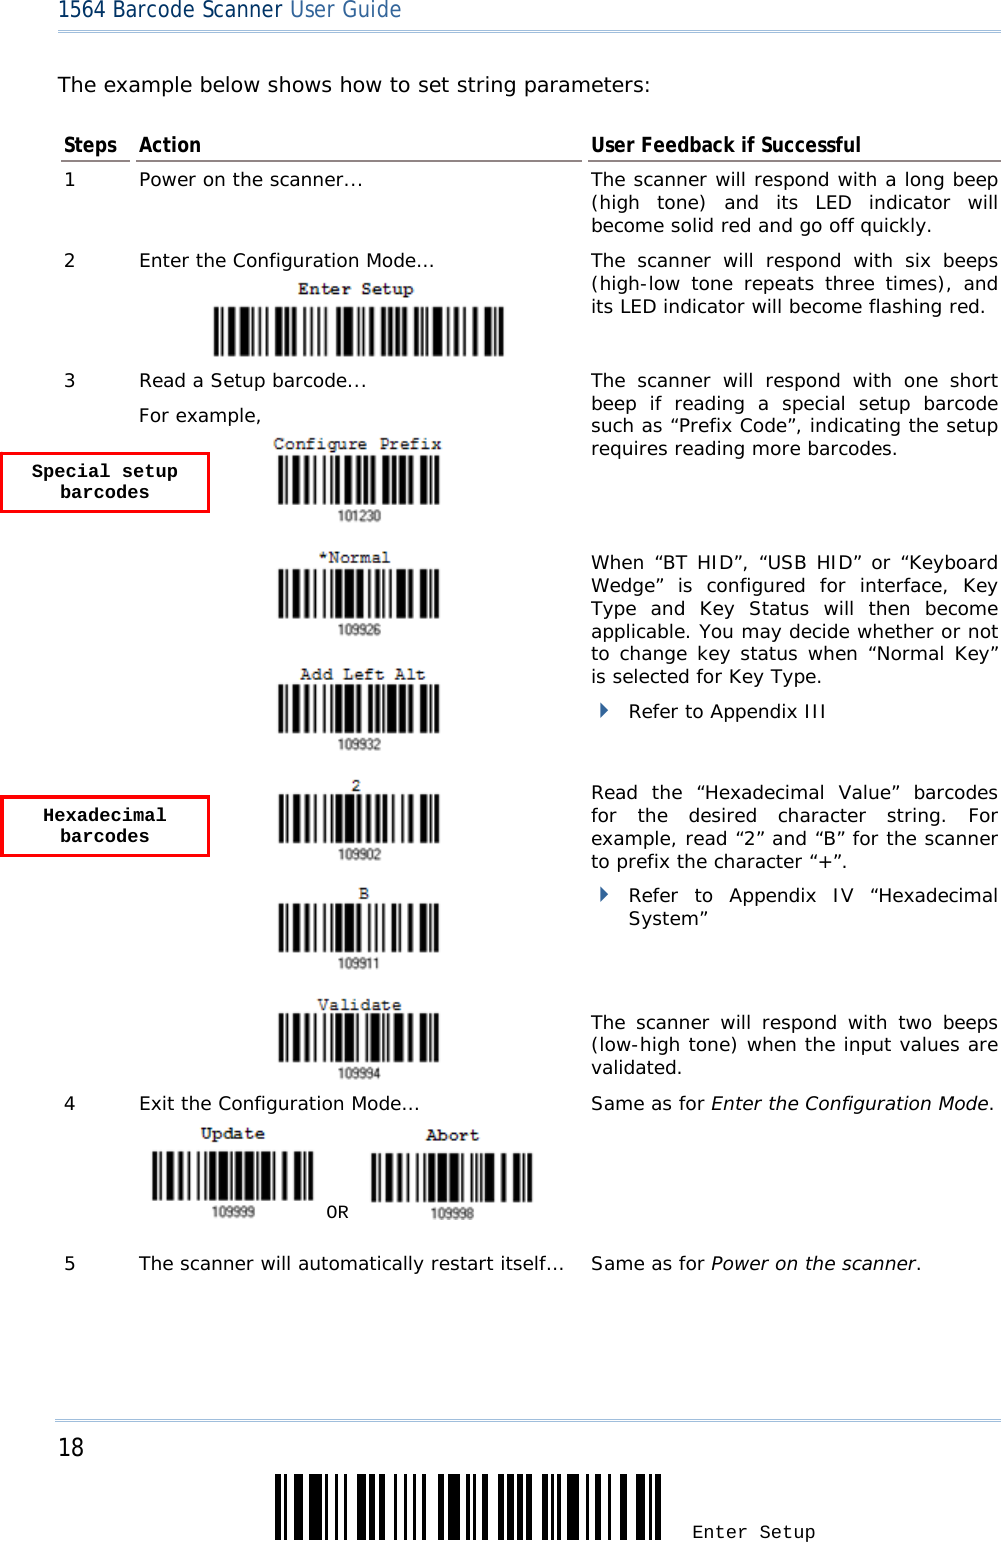 18 Enter Setup 1564 Barcode Scanner User Guide  The example below shows how to set string parameters: Steps  Action  User Feedback if Successful 1  Power on the scanner... The scanner will respond with a long beep (high tone) and its LED indicator will become solid red and go off quickly. 2  Enter the Configuration Mode… The scanner will respond with six beeps (high-low tone repeats three times), and its LED indicator will become flashing red.  3  Read a Setup barcode... For example,   The scanner will respond with one short beep if reading a special setup barcode such as “Prefix Code”, indicating the setup requires reading more barcodes.       When “BT HID”, “USB HID” or “Keyboard Wedge” is configured for interface, Key Type and Key Status will then become applicable. You may decide whether or not to change key status when “Normal Key” is selected for Key Type.  Refer to Appendix III     Read the “Hexadecimal Value” barcodes for the desired character string. For example, read “2” and “B” for the scanner to prefix the character “+”.  Refer to Appendix IV “Hexadecimal System”   The scanner will respond with two beeps (low-high tone) when the input values are validated. 4  Exit the Configuration Mode…   OR     Same as for Enter the Configuration Mode. 5  The scanner will automatically restart itself…  Same as for Power on the scanner.   Special setup barcodes Hexadecimal barcodes 